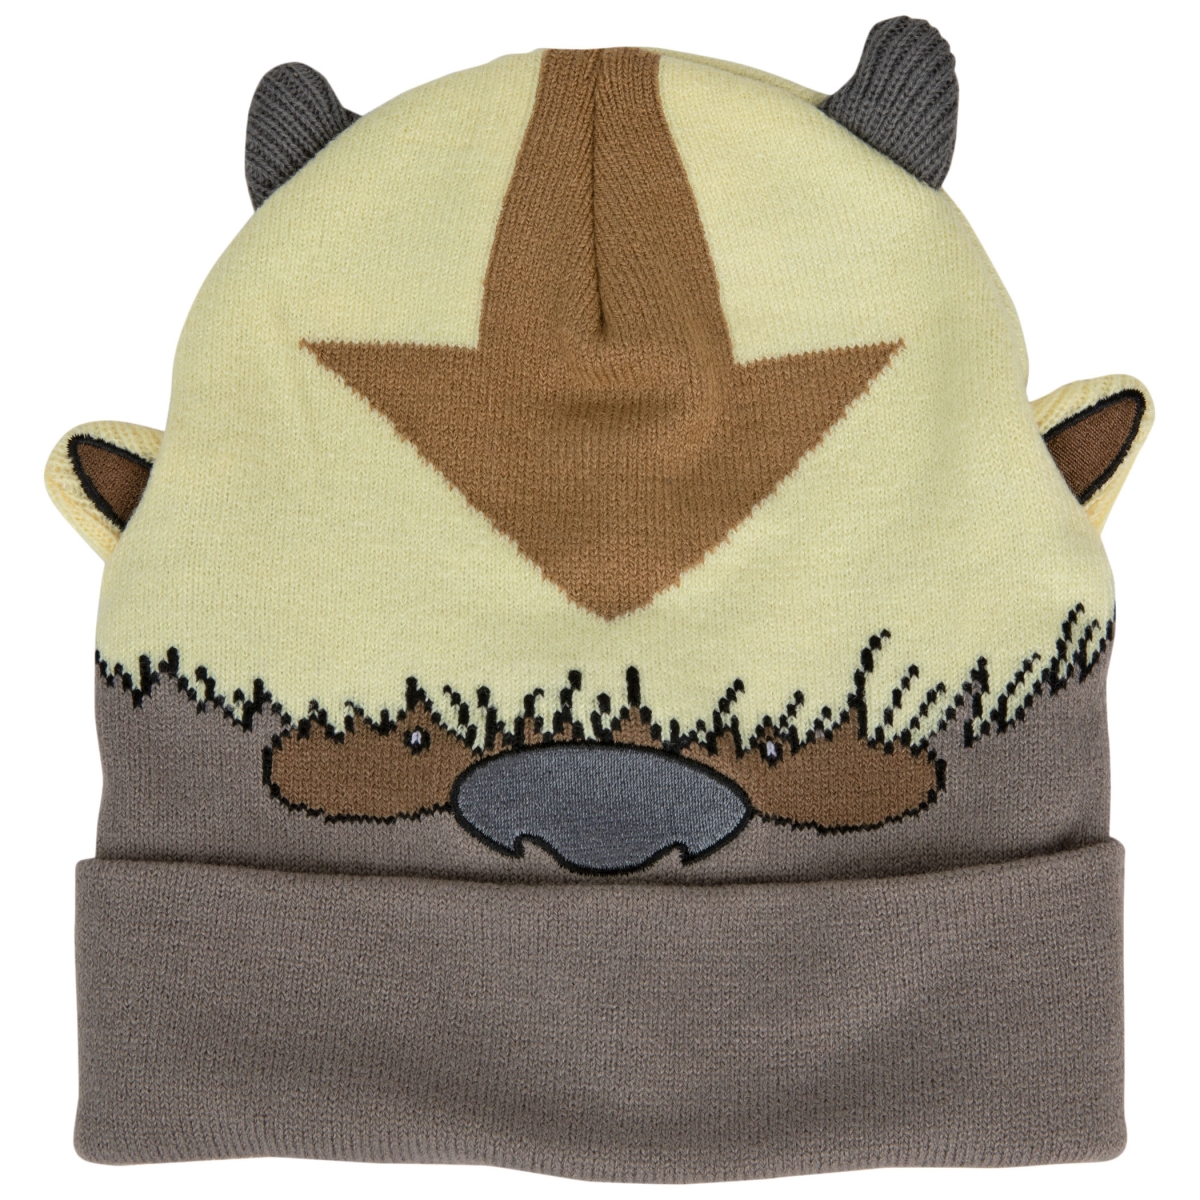 Picture of Avatar the Last Airbender 828720 Appa Costume Cuffed Beanie